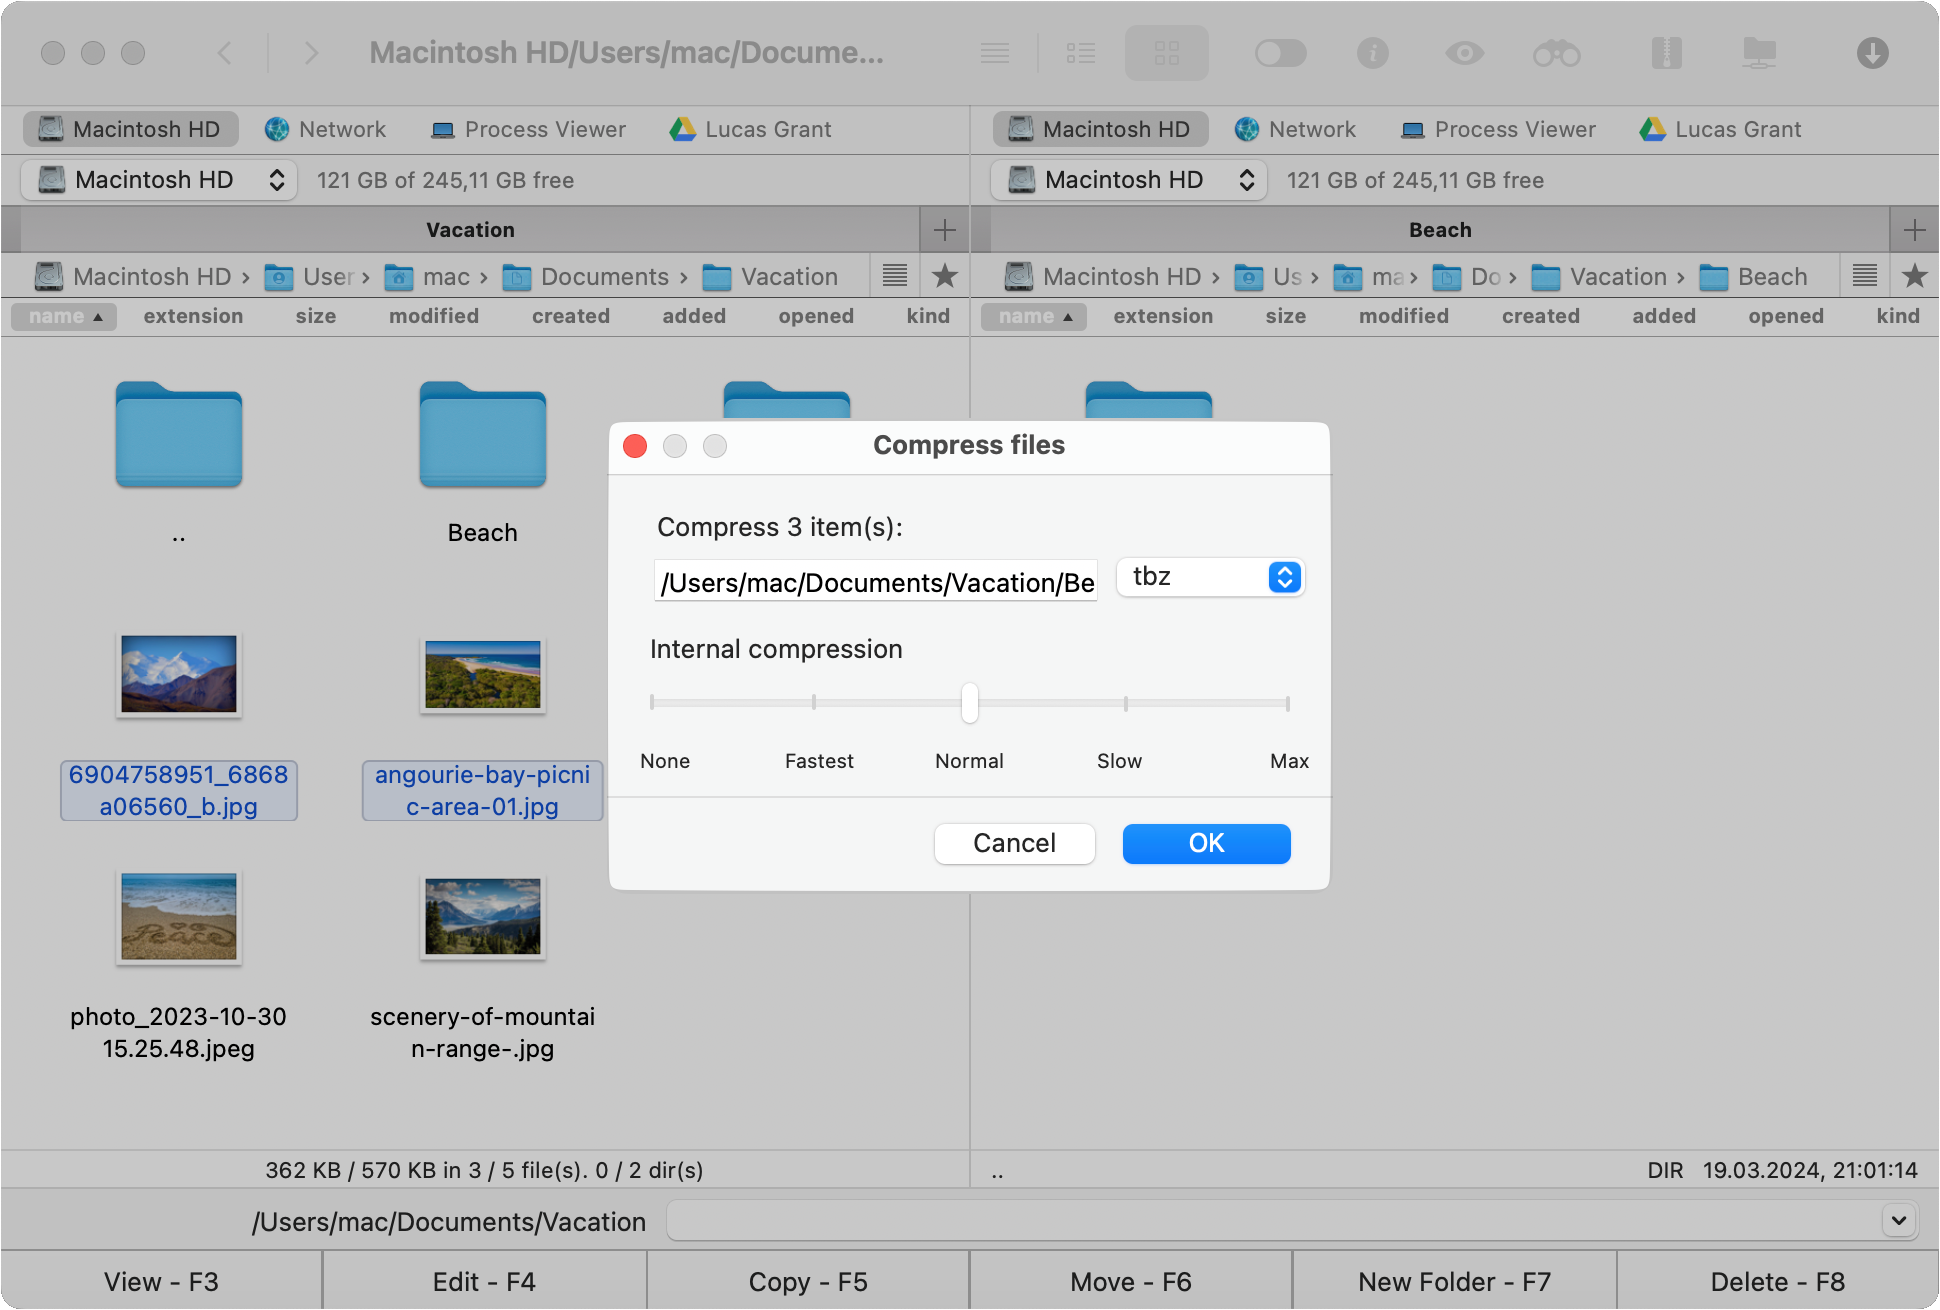 The "Compress files" pop-up window is shown